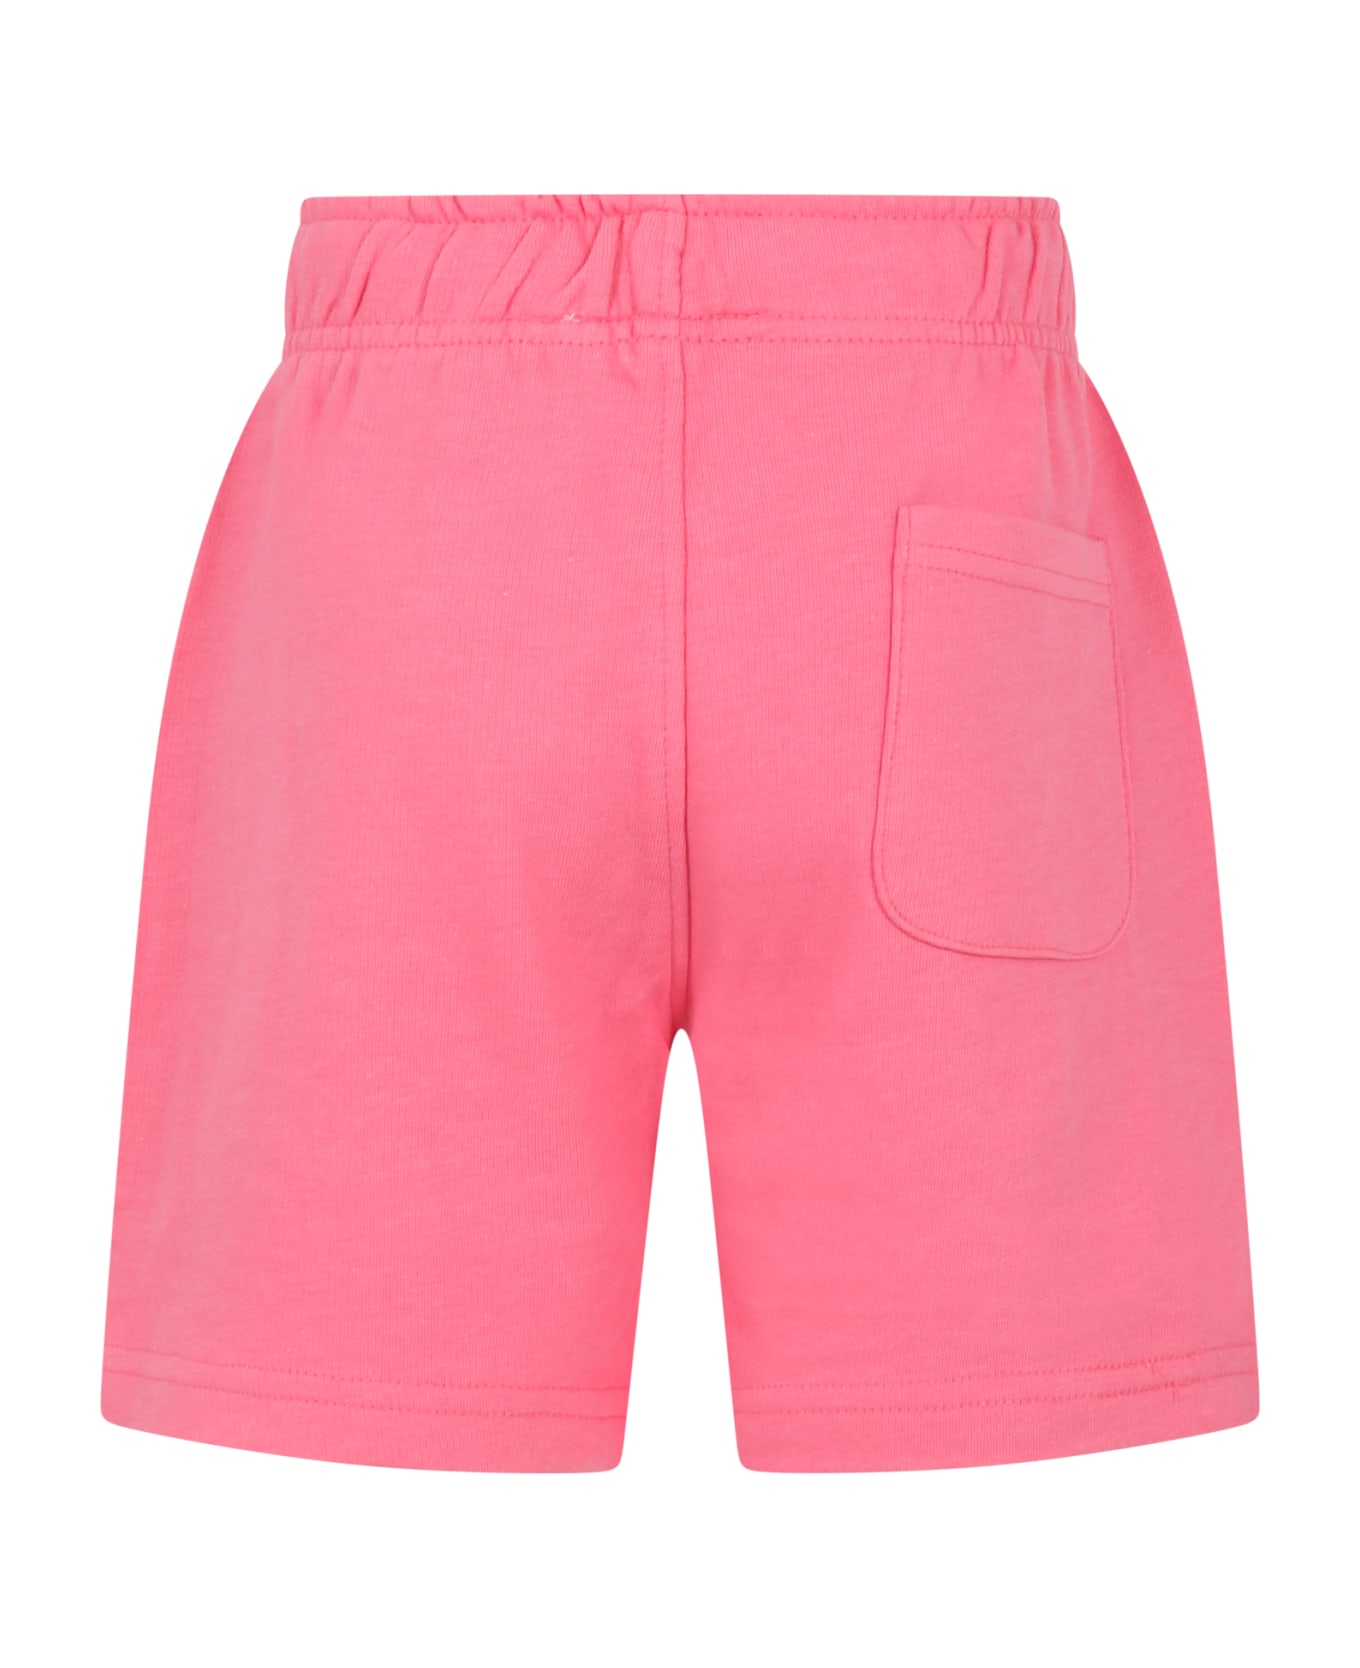 Molo Pink Shorts For Girl With Peace Symbol - Pink ボトムス